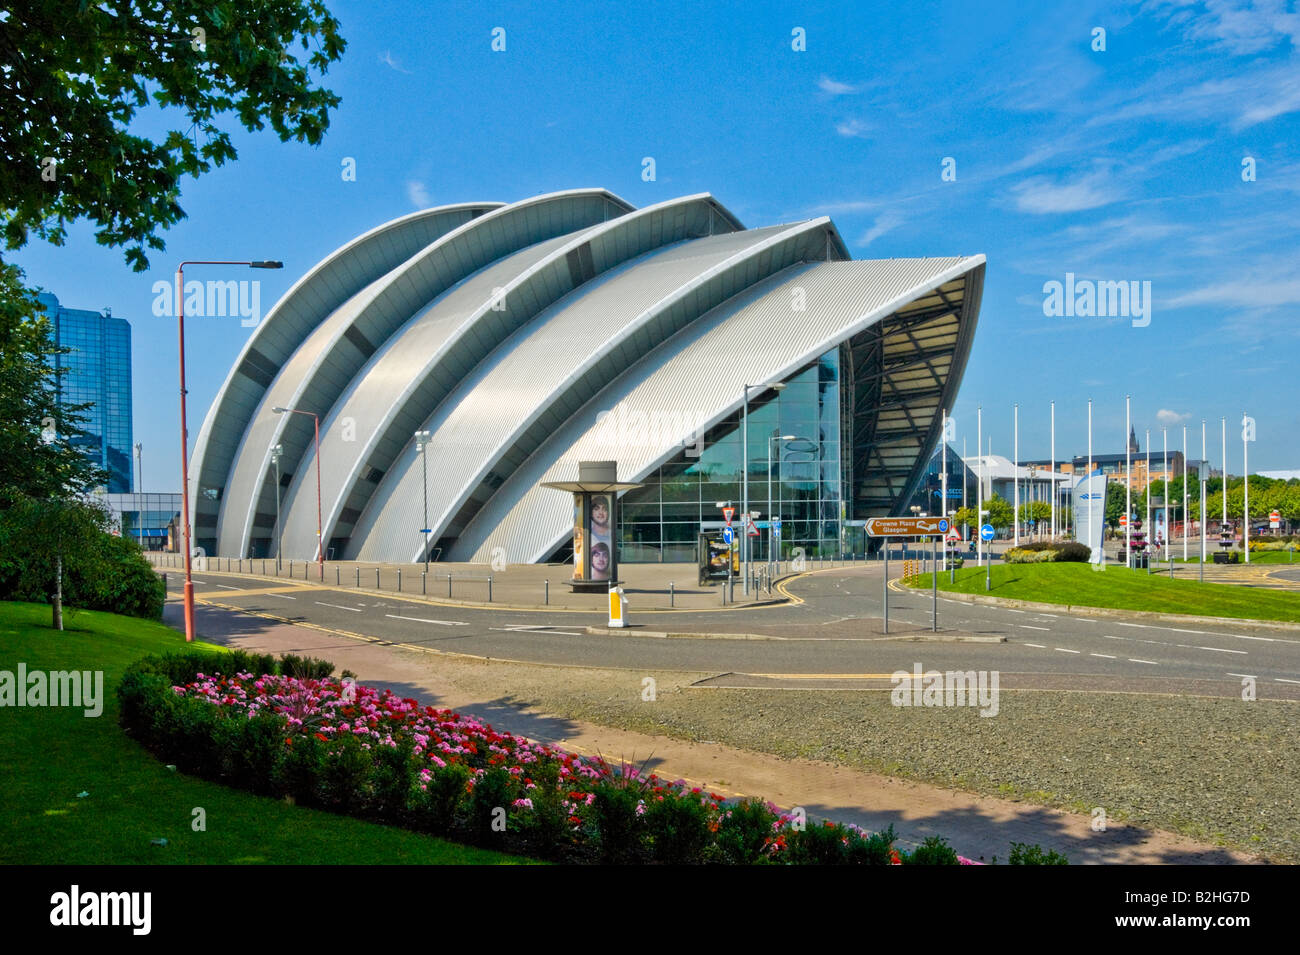 The Clyde Auditorium also called popularly the 'Armadillo' forming part of the Scottish Exhibition + Conference Centre Glasgow Stock Photo